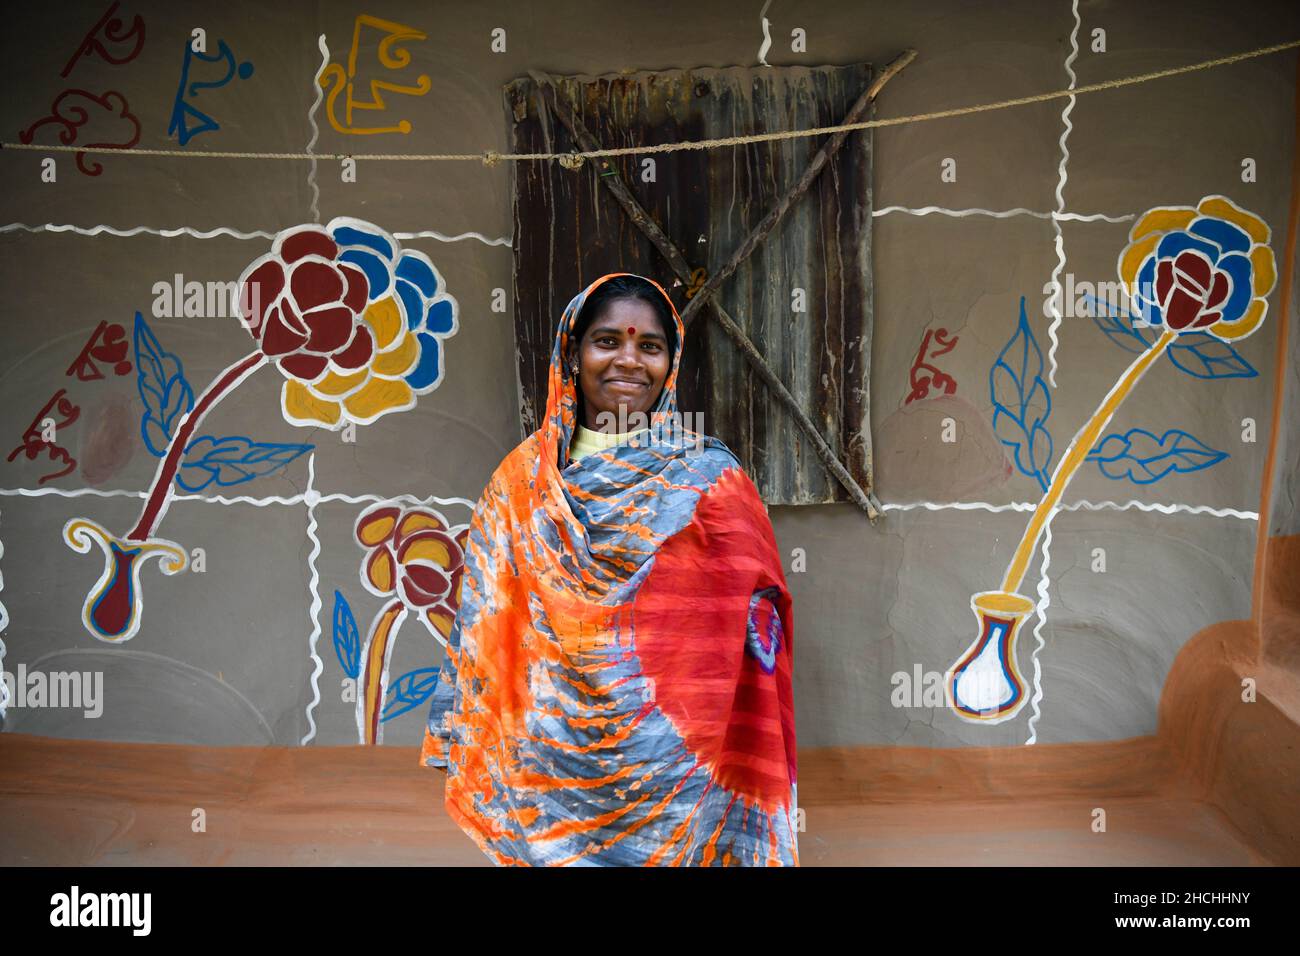 Rajshahi, Bangladesh. 25th Dec, 2021. Santali woman poses for a photo in front of her painted house in Rajshahi. Santal tribe is an ethnic group native to eastern India. Santals are the largest tribe in the Jharkhand state of India in terms of population and are also found in the states of Assam, Tripura, Bihar, Odisha and West Bengal. They are the largest ethnic minority in northern Bangladesh's Rajshahi Division and Rangpur Division. (Photo by Piyas Biswas/SOPA Images/Sipa USA) Credit: Sipa USA/Alamy Live News Stock Photo